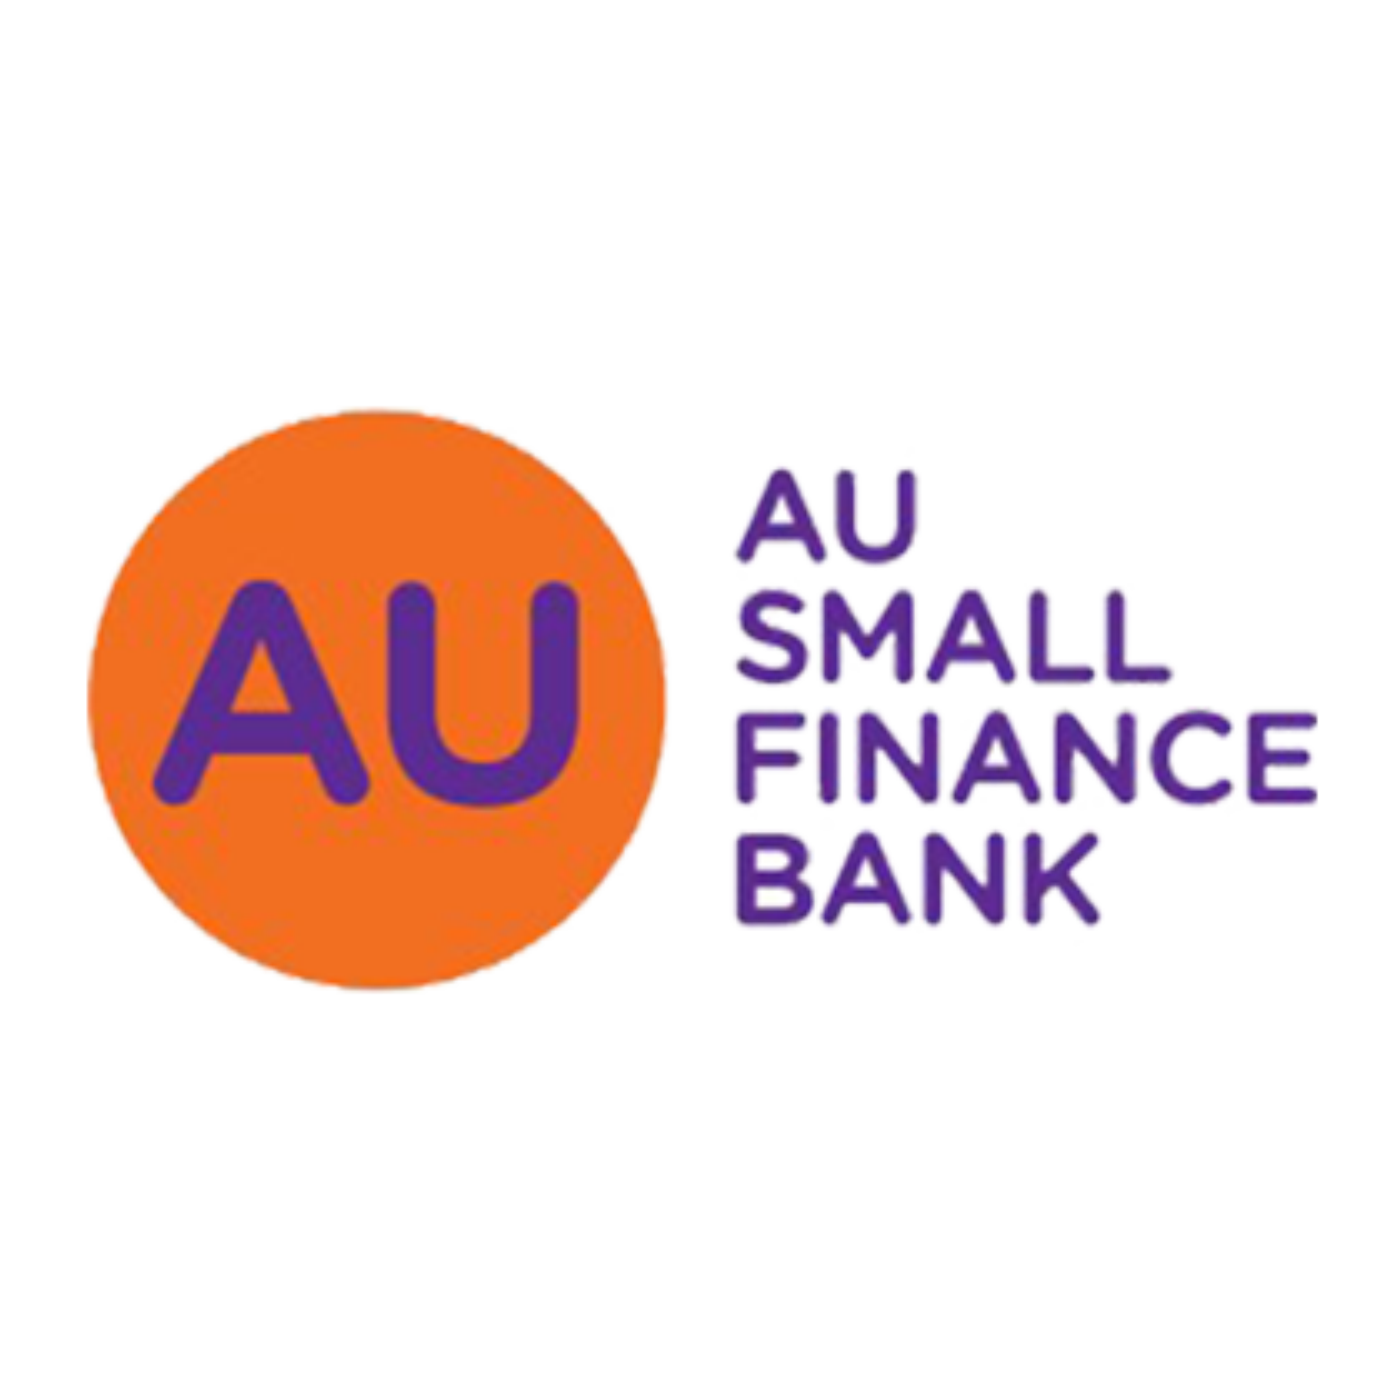 Au Small Finance Bank stocks: Add Au Small Finance Bank, target price Rs  700: ICICI Securities - The Economic Times